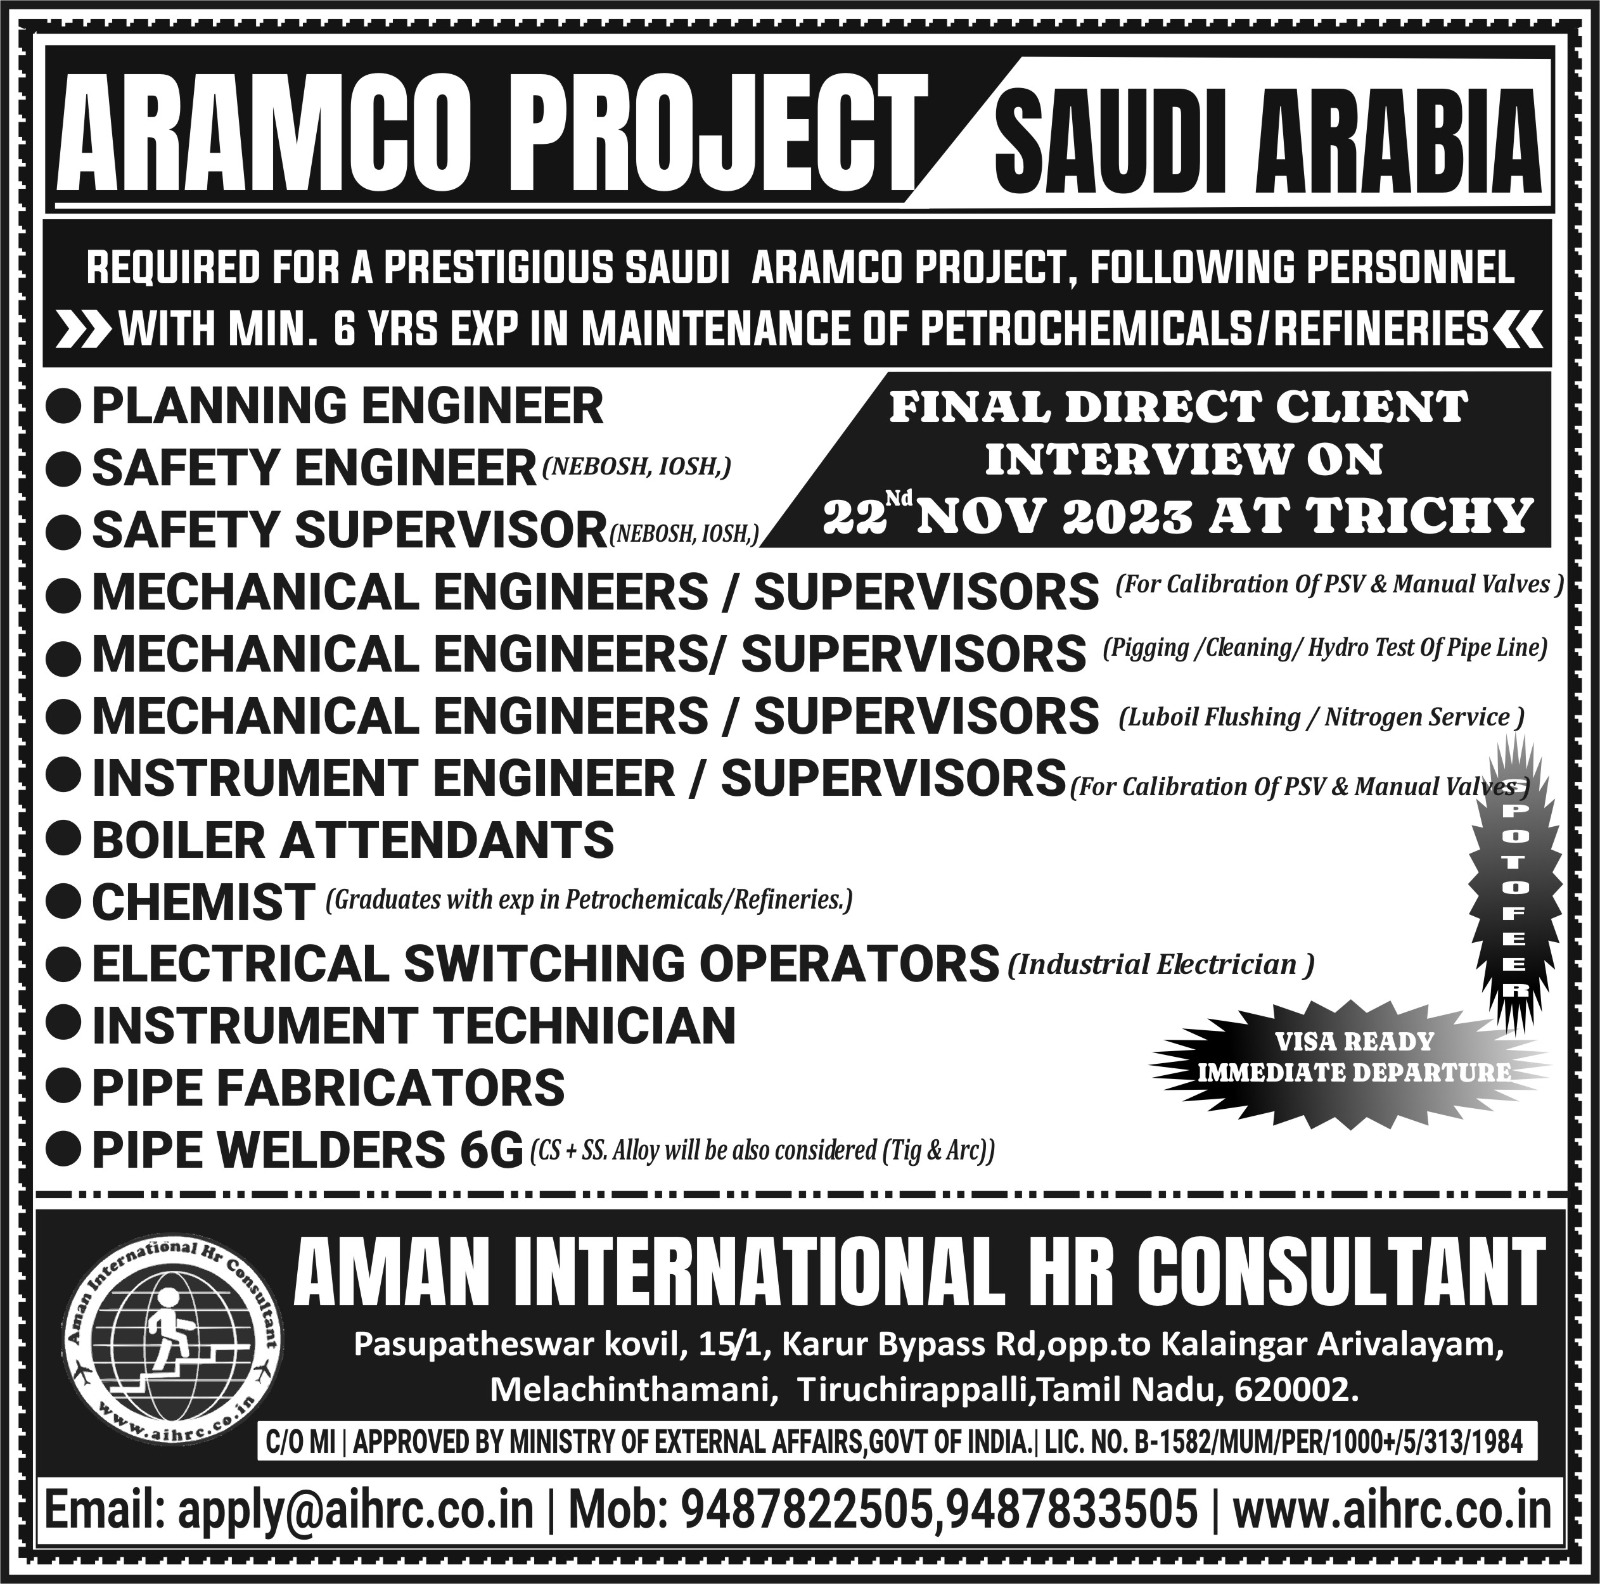 DIRECT CLIENT INTERVIEW AT TRICHY | ARAMCO PROJECT SAUDI 